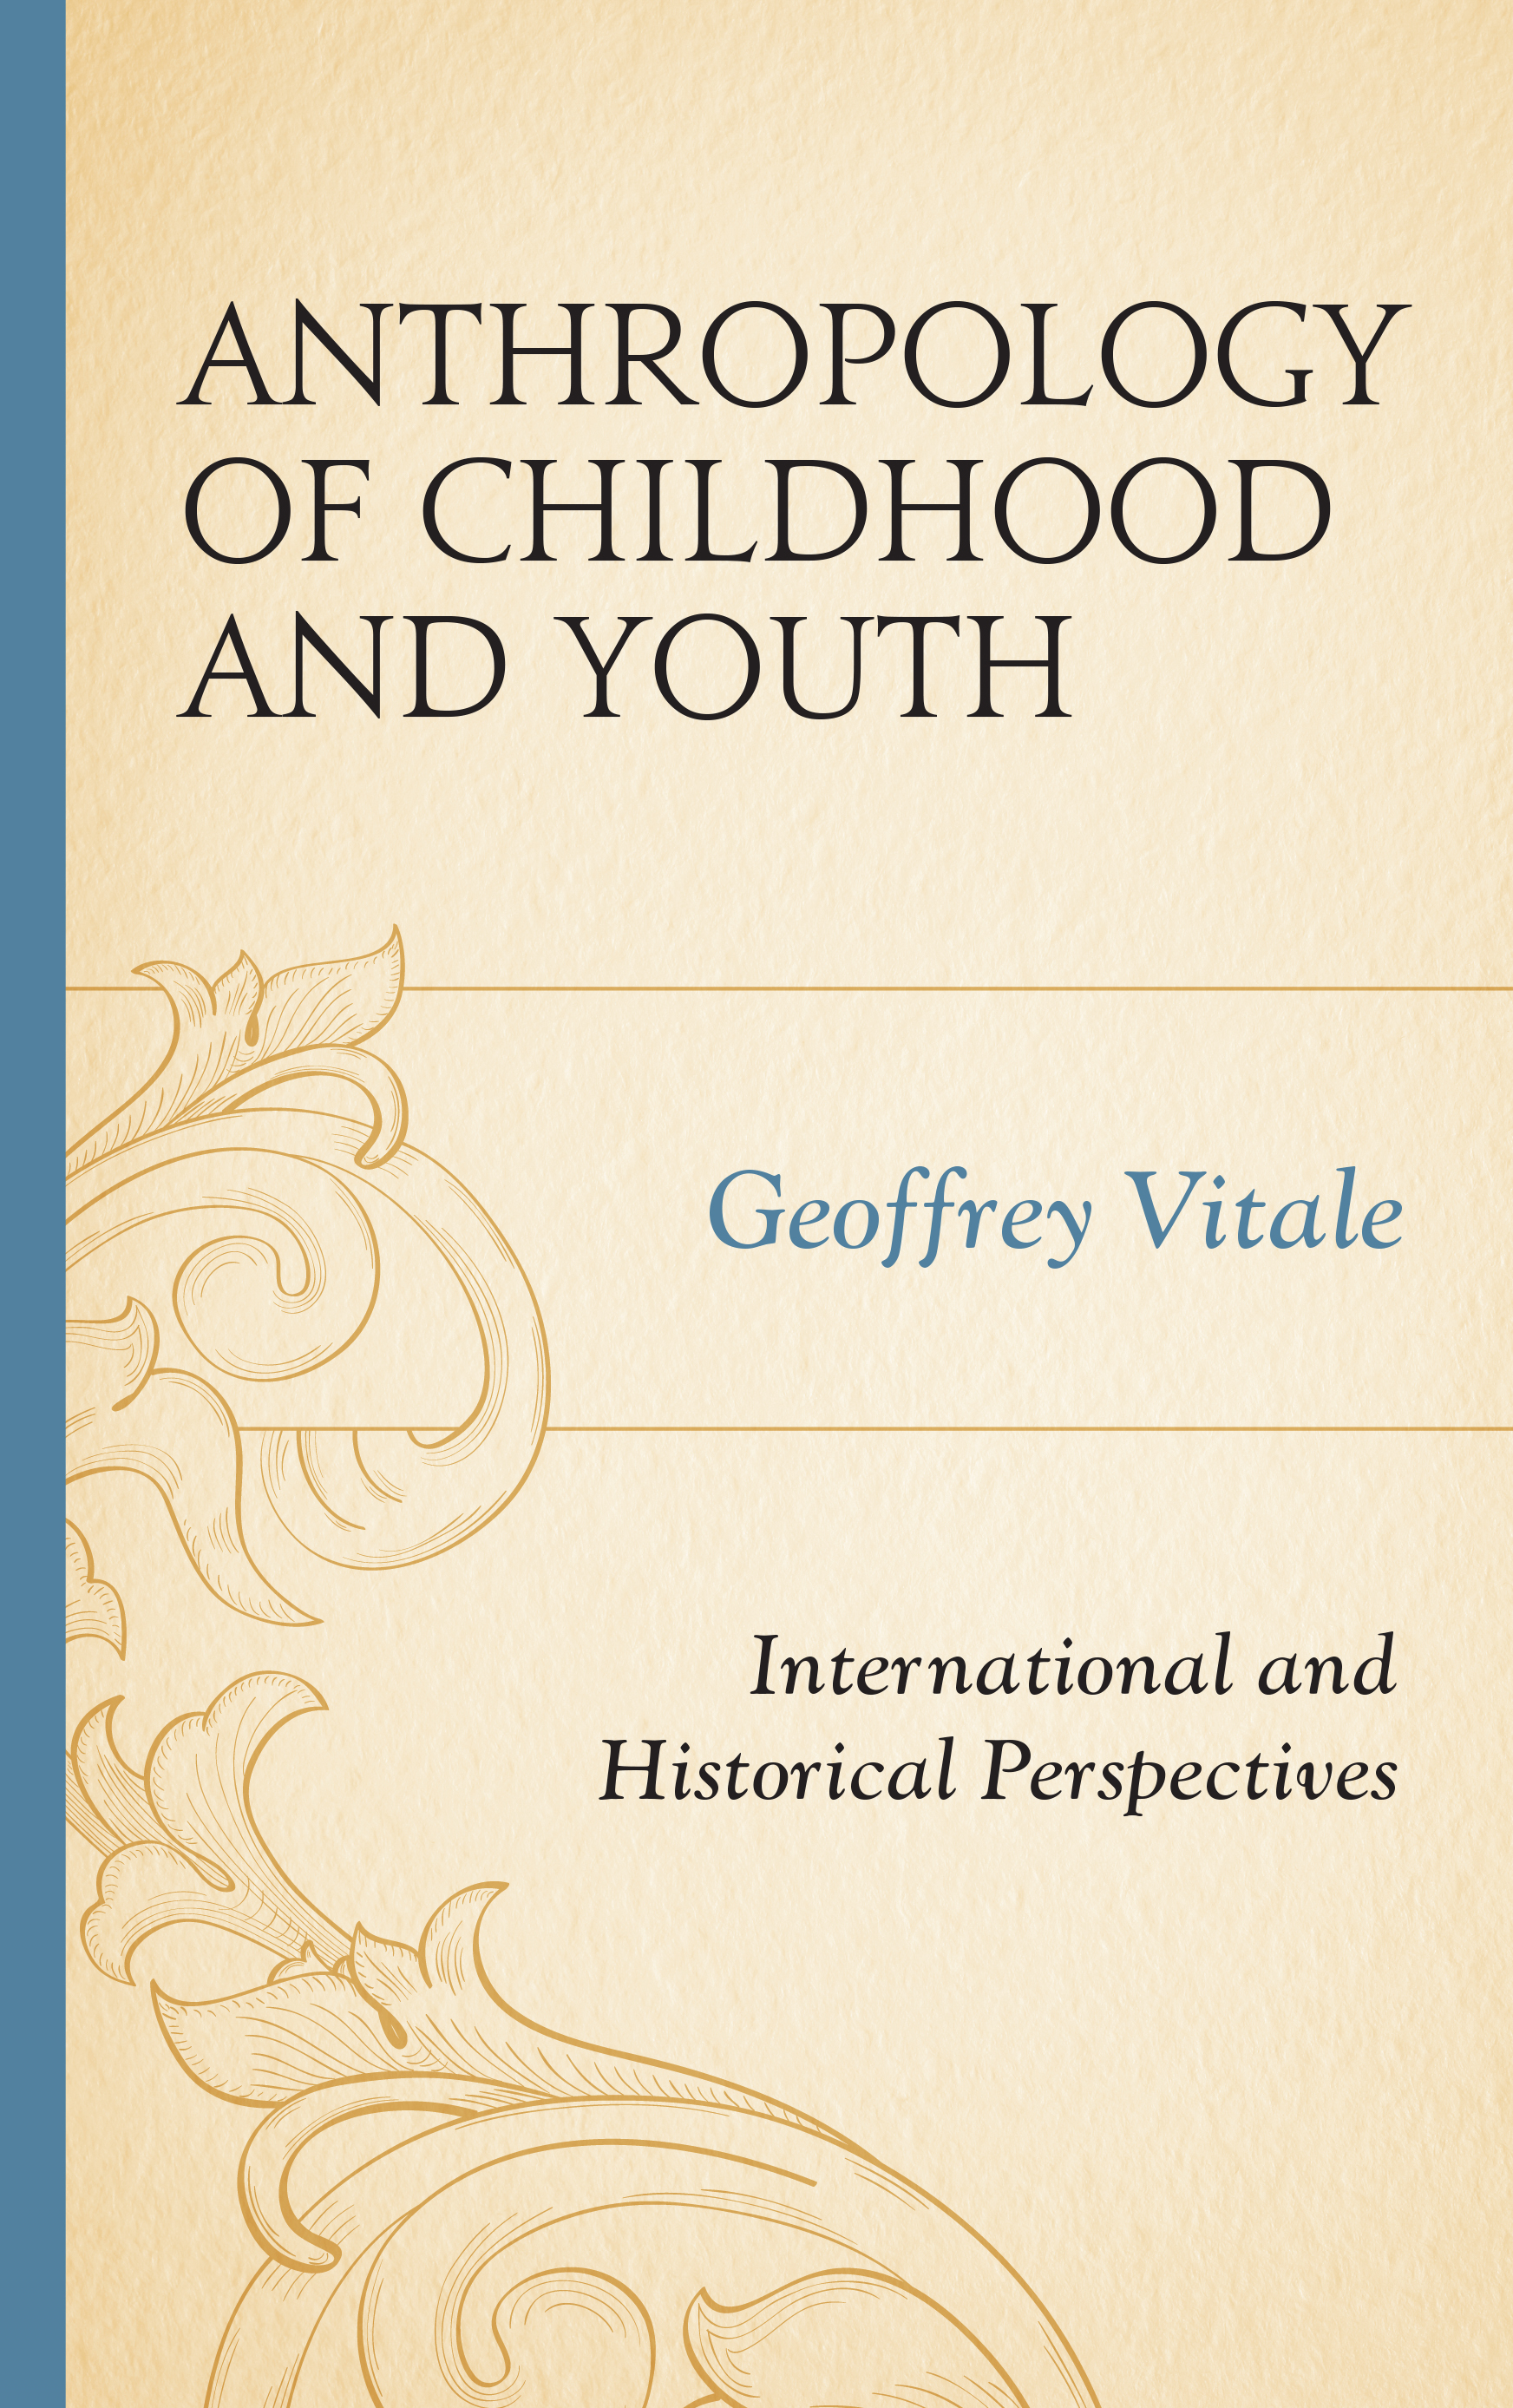 Anthropology of Childhood and Youth: International and Historical Perspectives